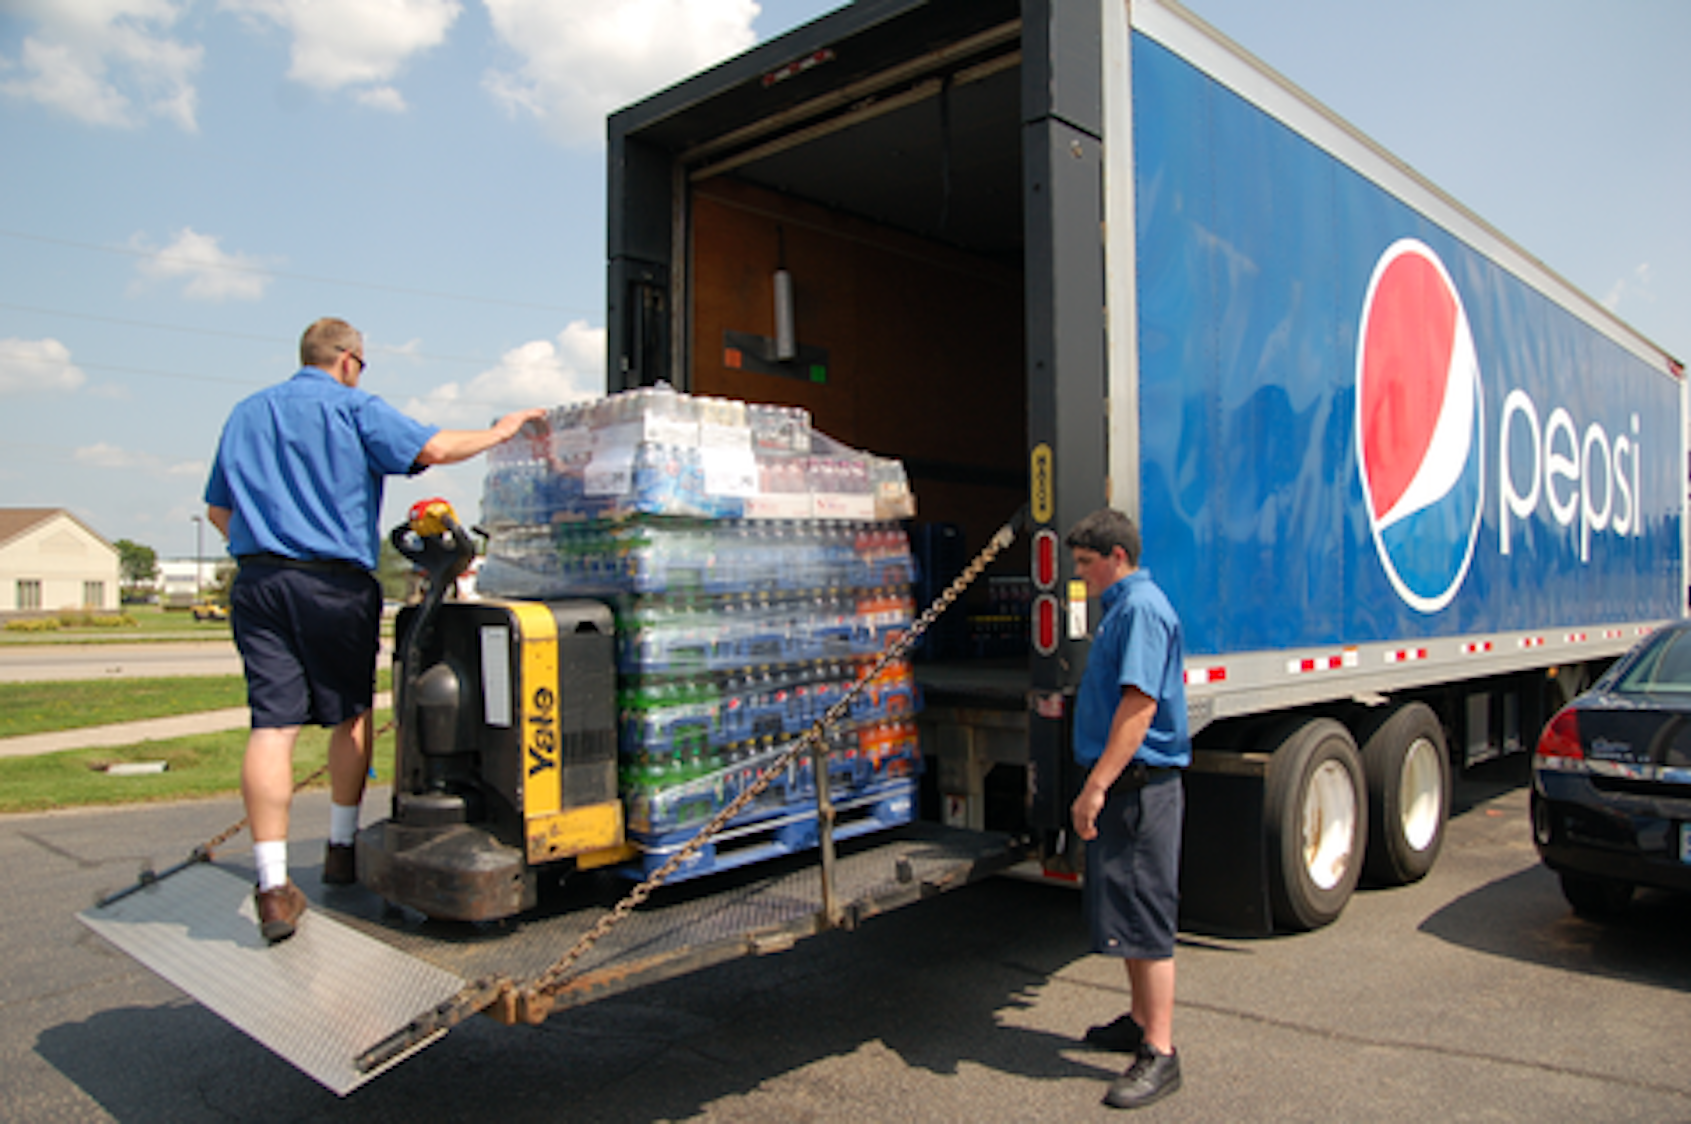 PepsiCo Continues To Innovate Its Fleet Through 'Run On Less